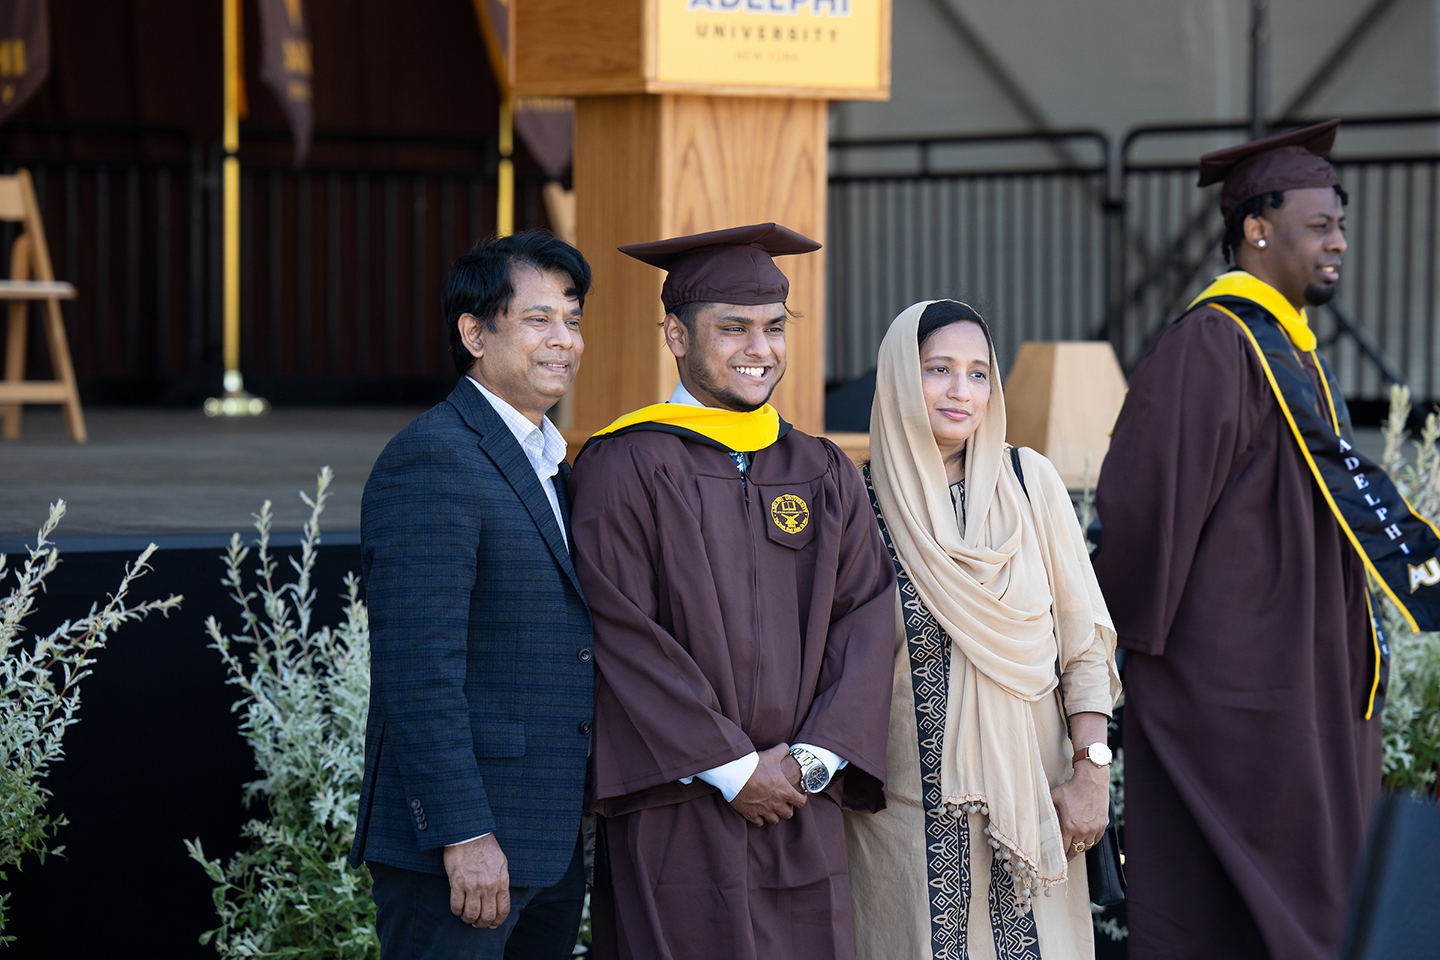 Graduating student poses with proud parents in front of commencement stage.